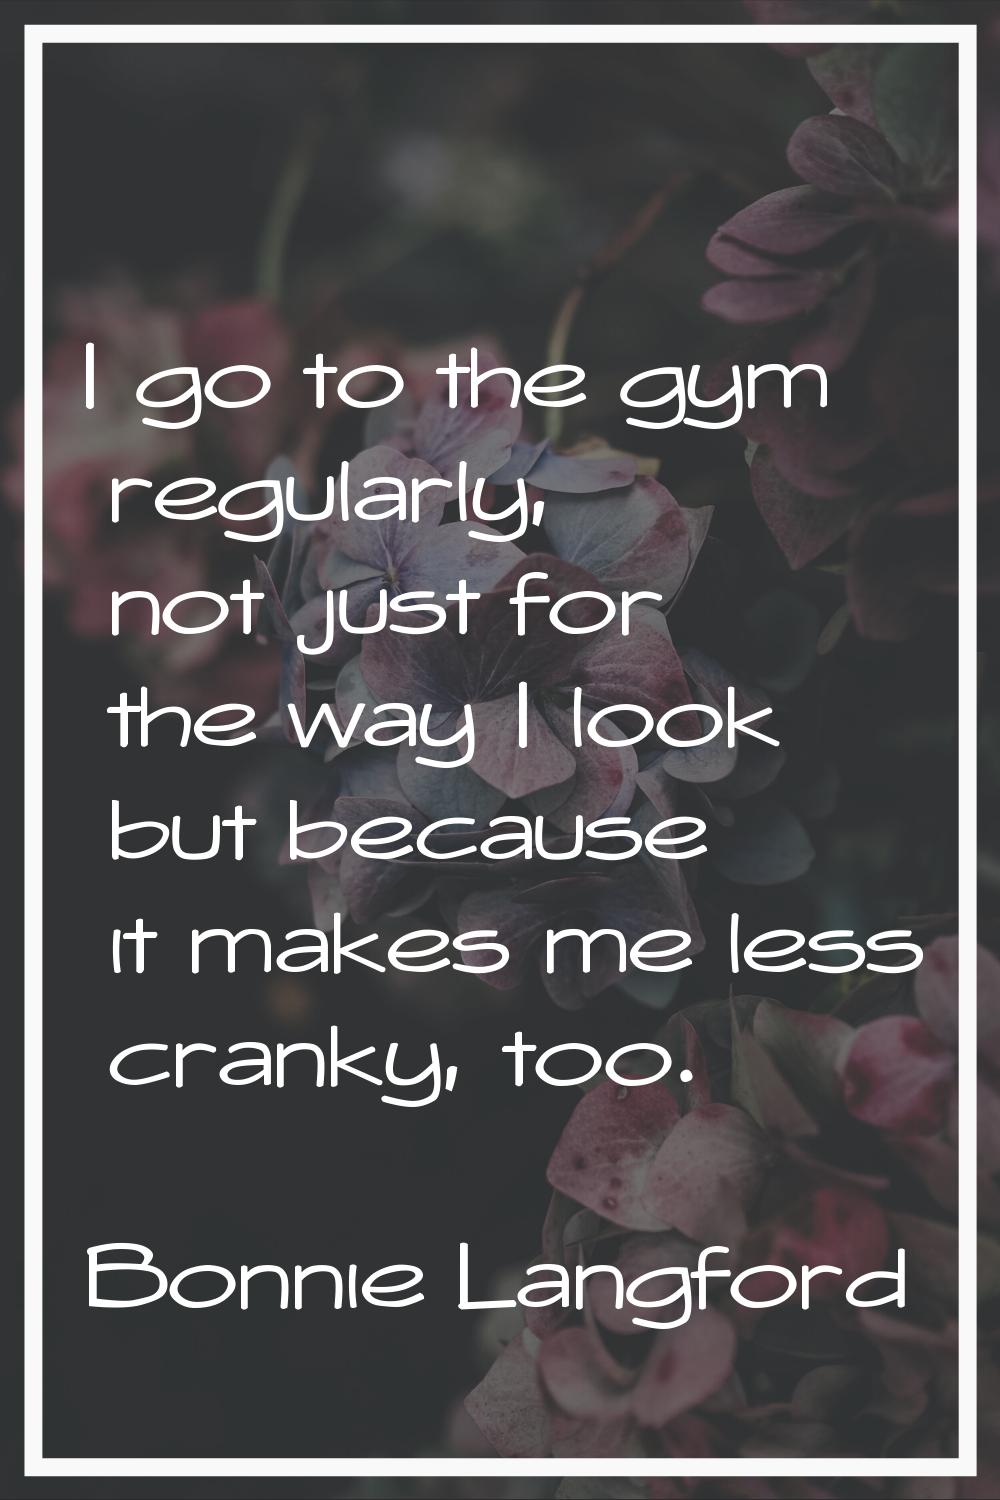 I go to the gym regularly, not just for the way I look but because it makes me less cranky, too.